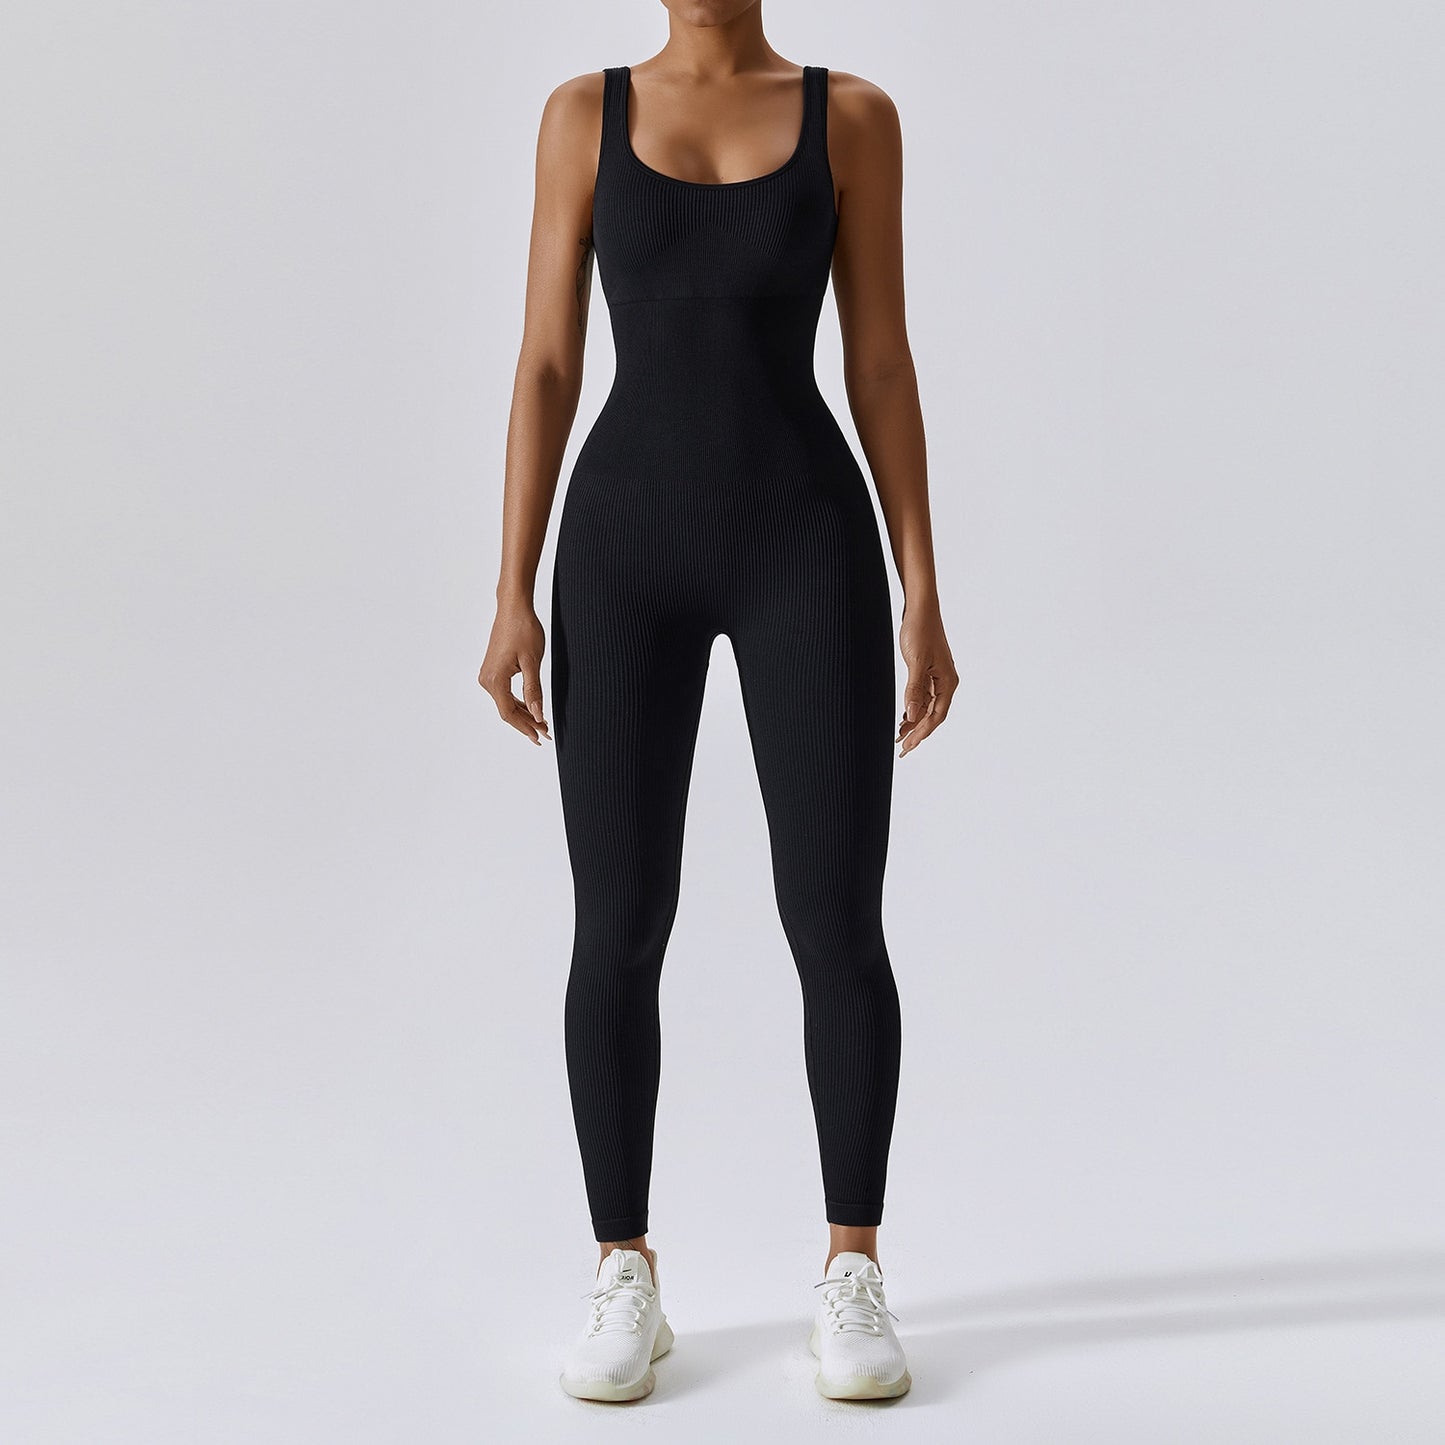 "Sweltering" Women's Yoga One-Piece TrackSuit.